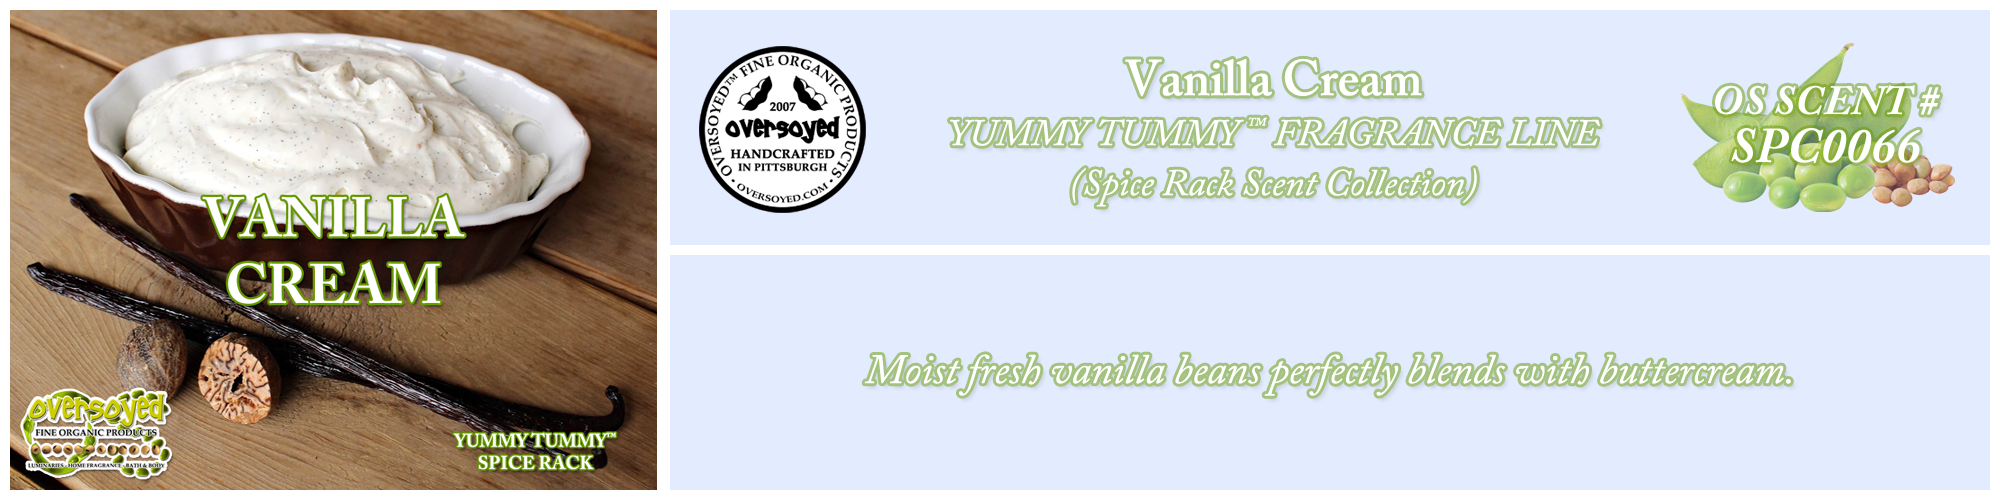 Vanilla Cream Handcrafted Products Collection